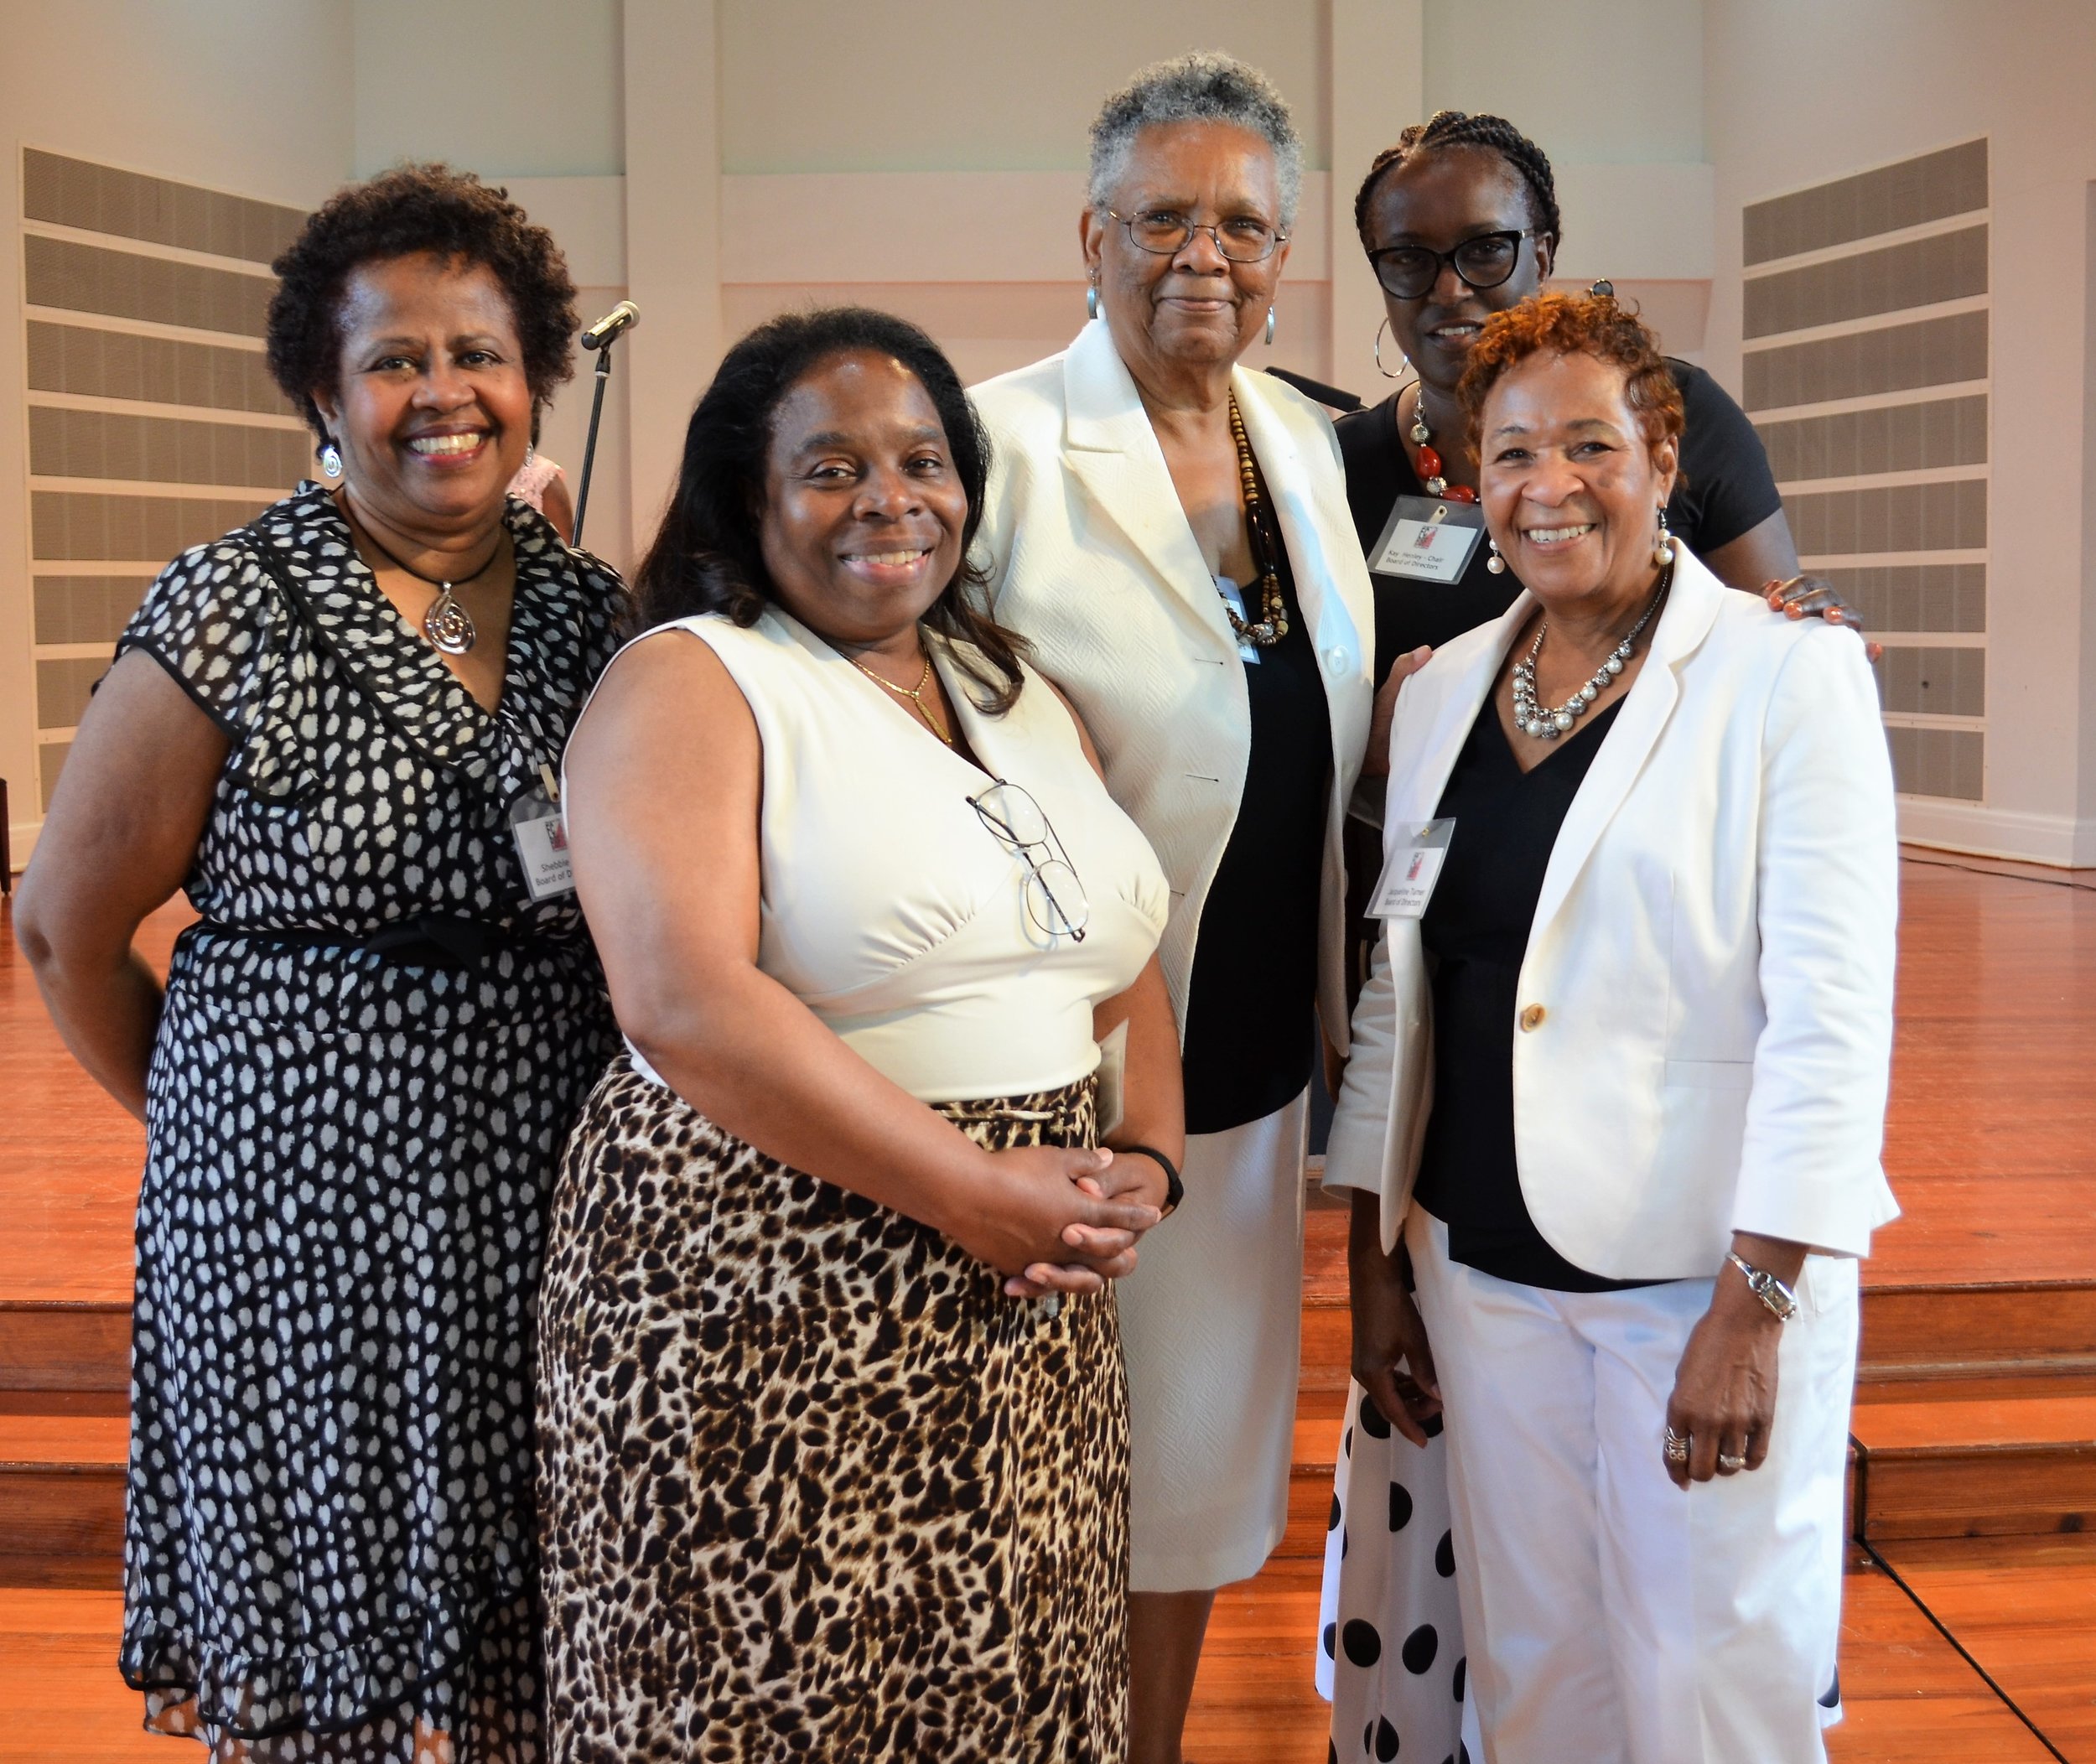  (Left to Right) 2018-2019 FCPSF Board Members: Shebbie R. Rice, Melanie E. Cooke, Carolyn Gullatt, Kay Henley and Jacqueline Turner. (Not Pictured: Shadonna Logan and Ingrid Williams) 